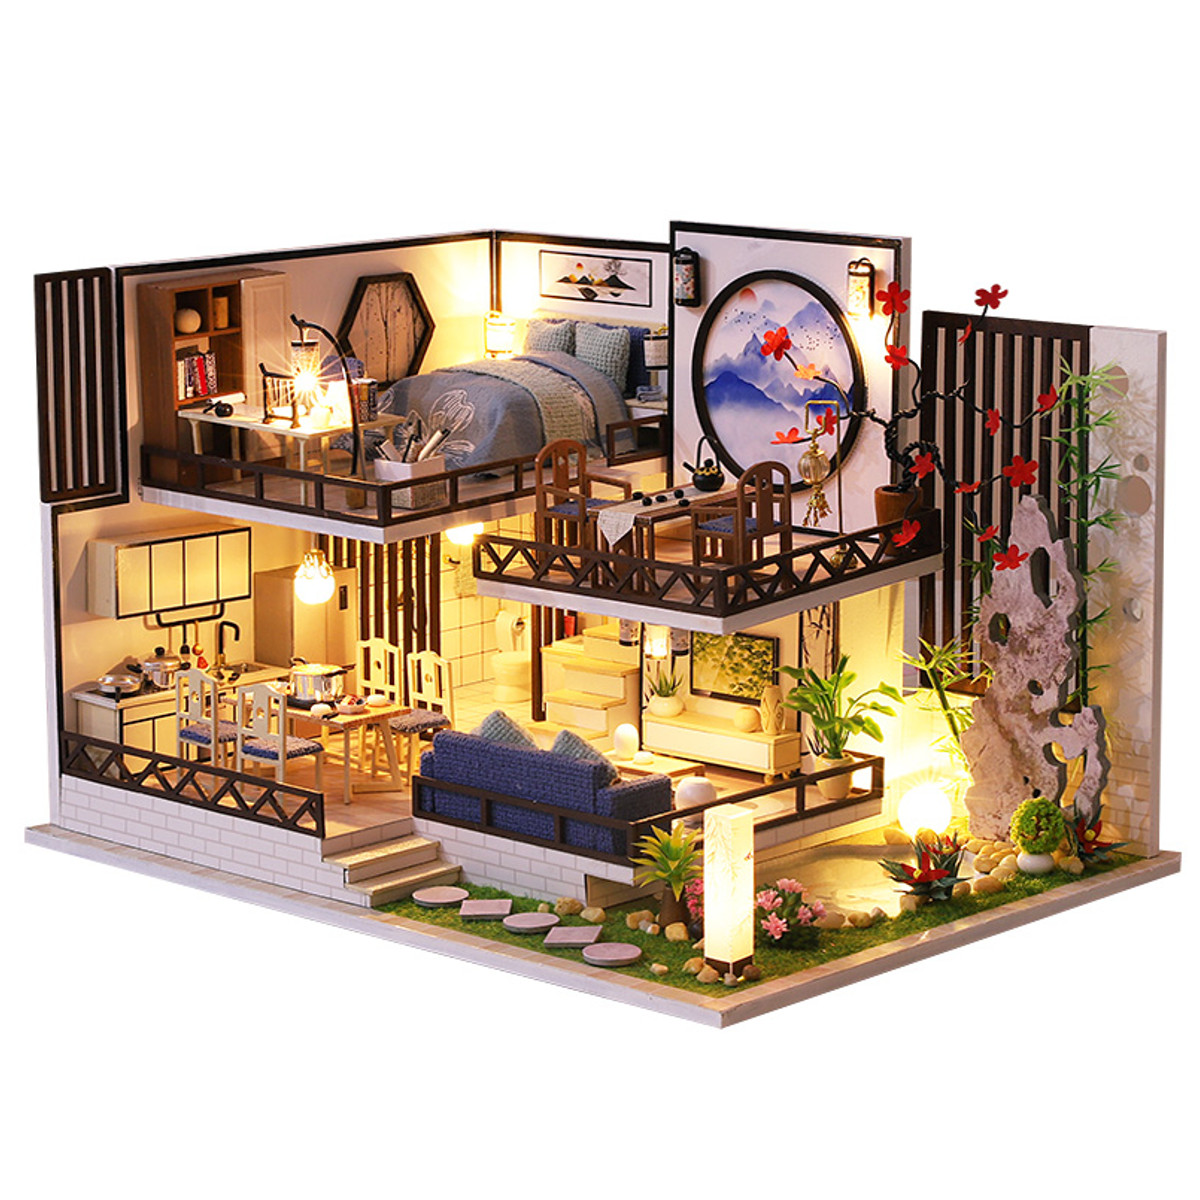 M-029-Chinese-Style-Wooden-DIY-Handmade-Assemble-Doll-House-Miniature-Furniture-Kit-with-LED-Effect--1838455-3